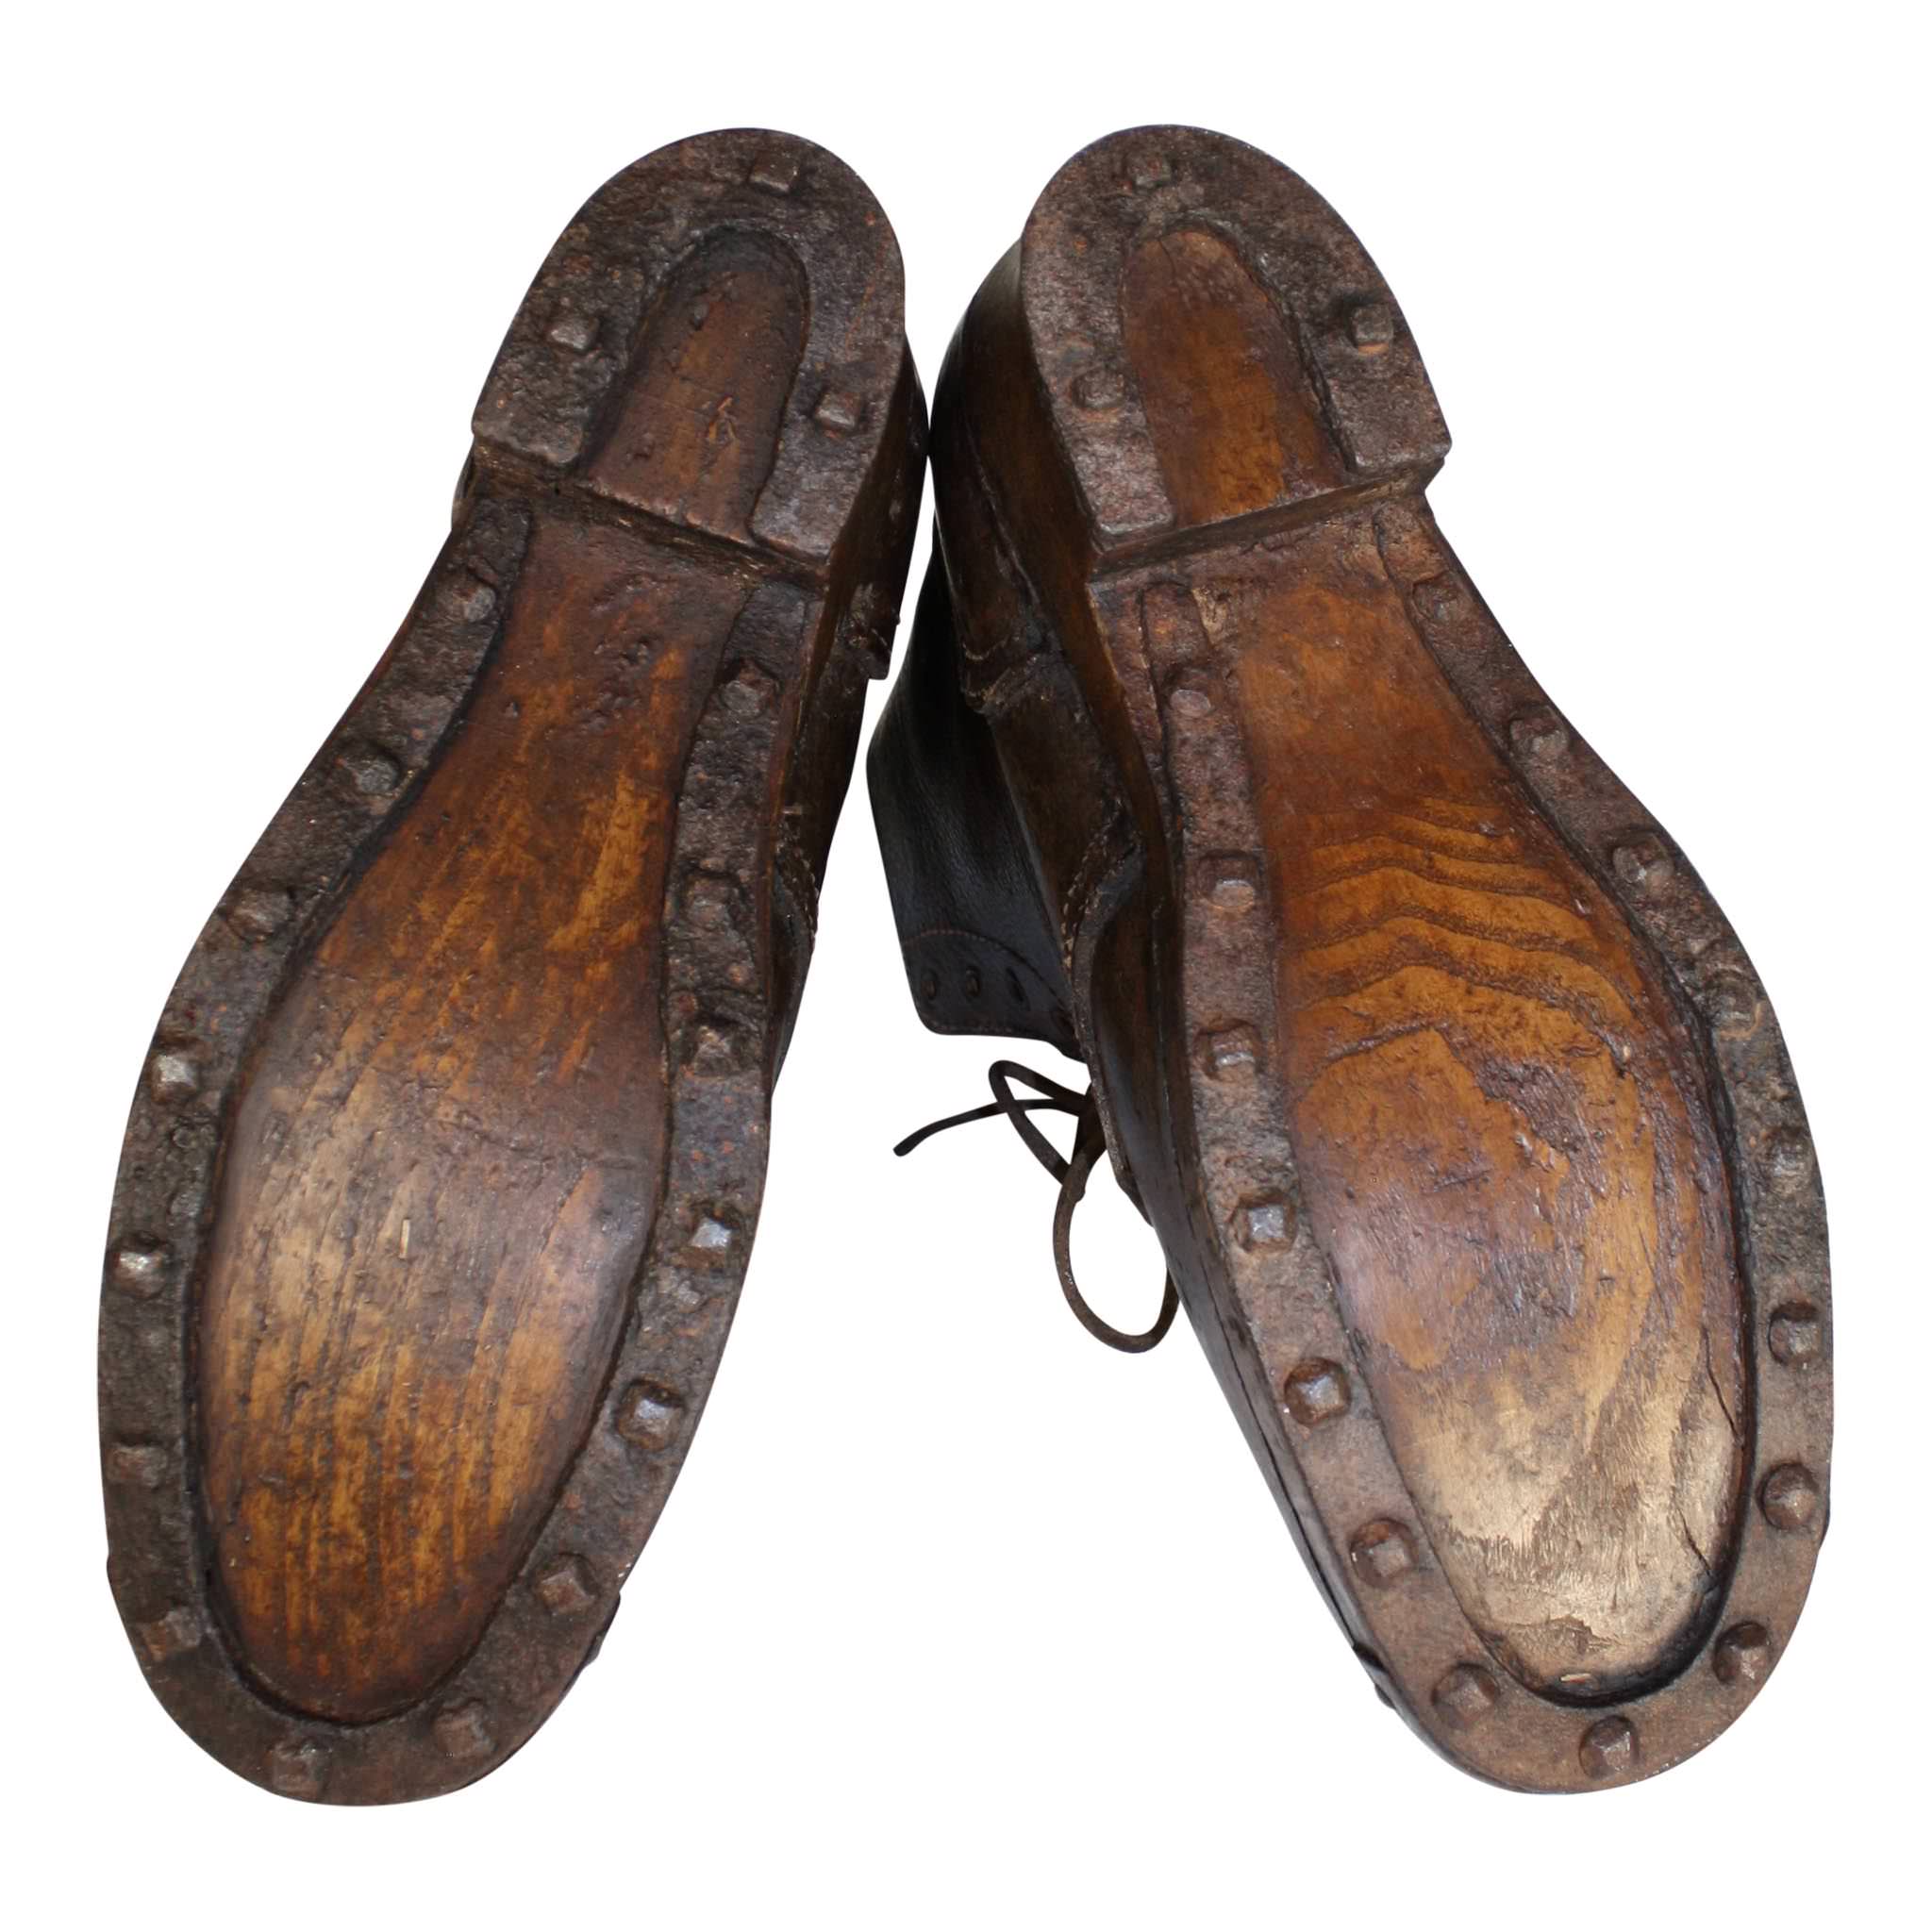 Leather Boots with Wooden Soles and 